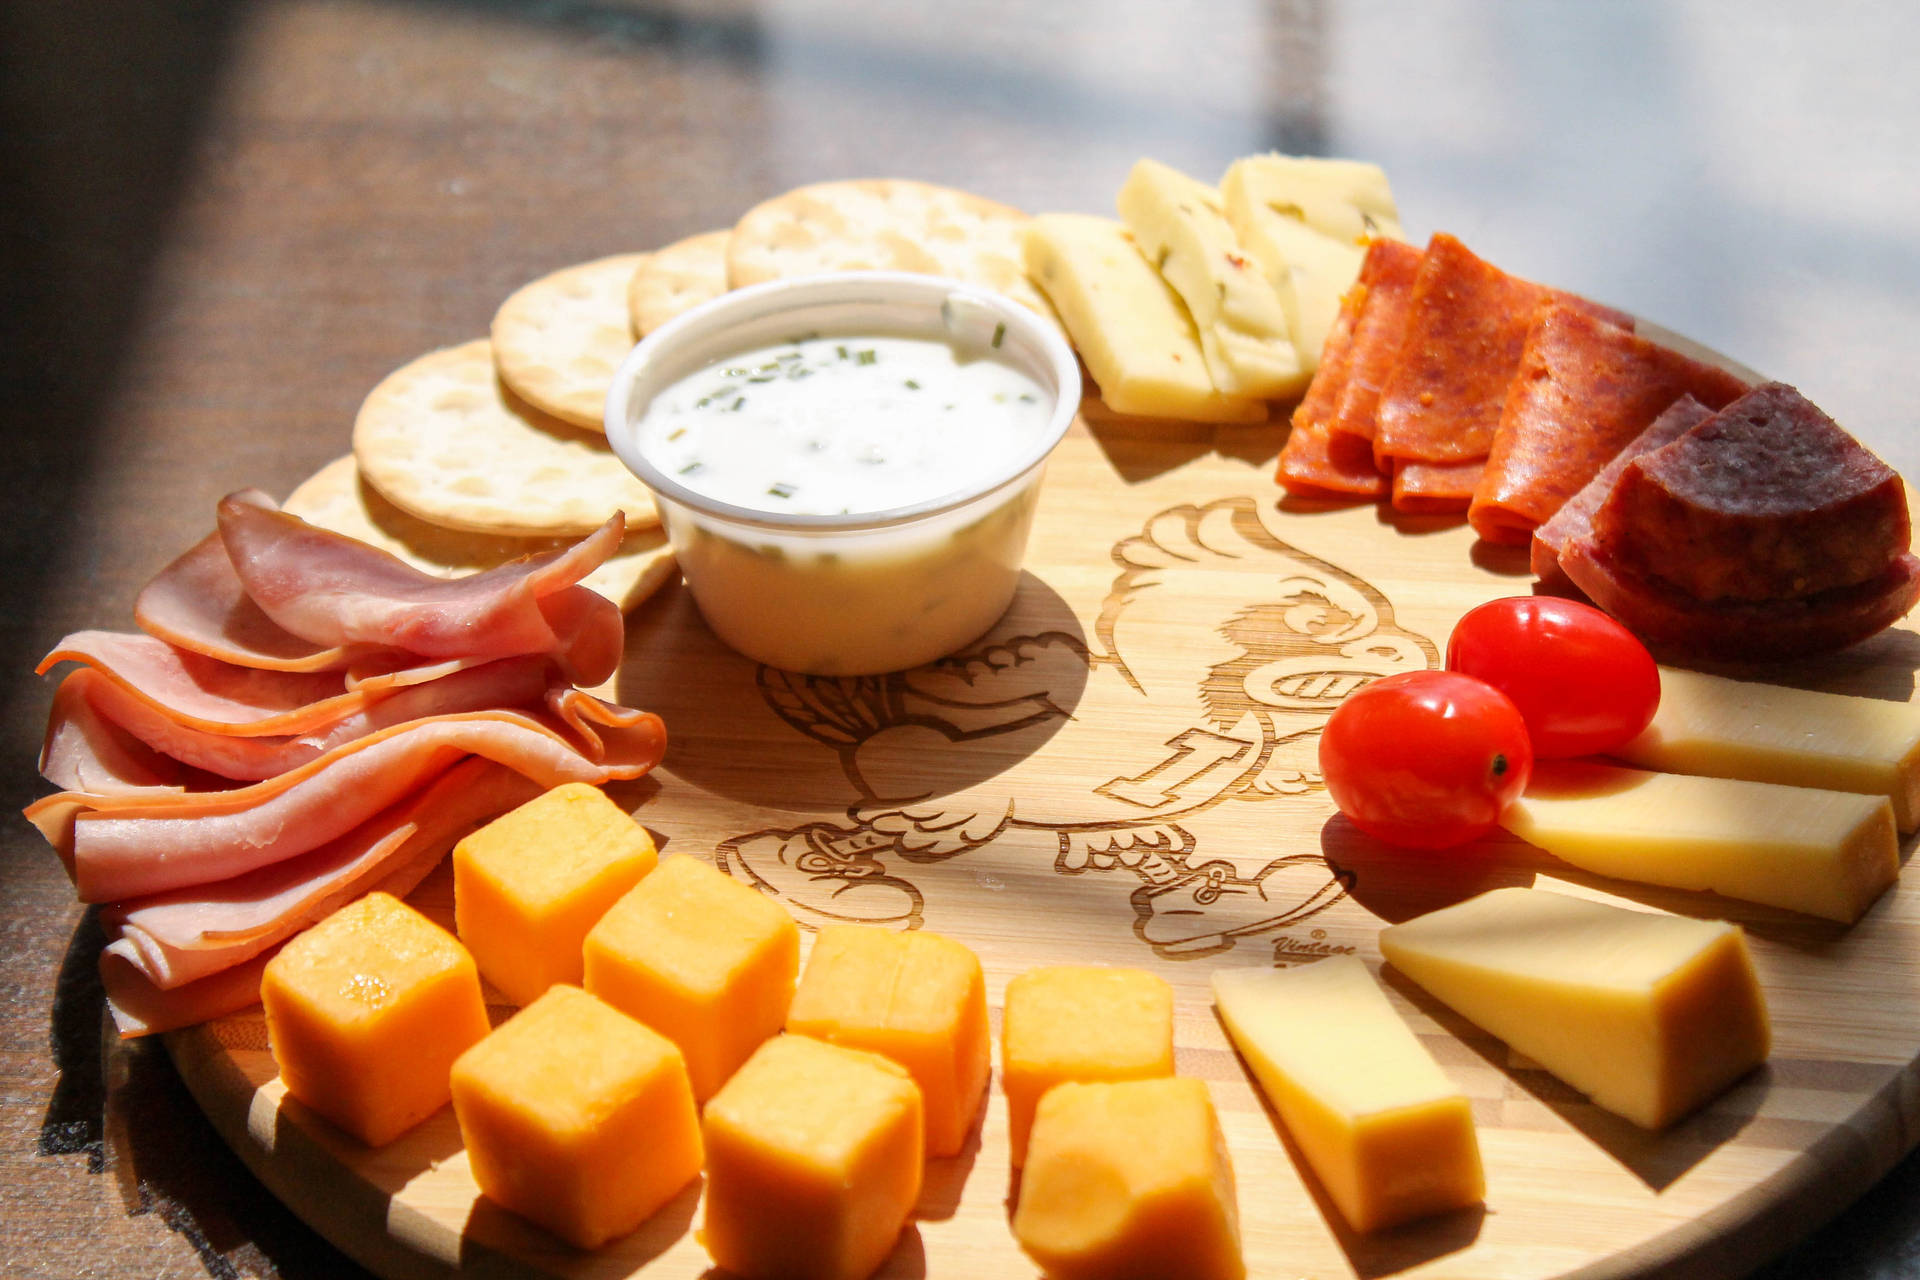 Simple Cheese And Meat Platter